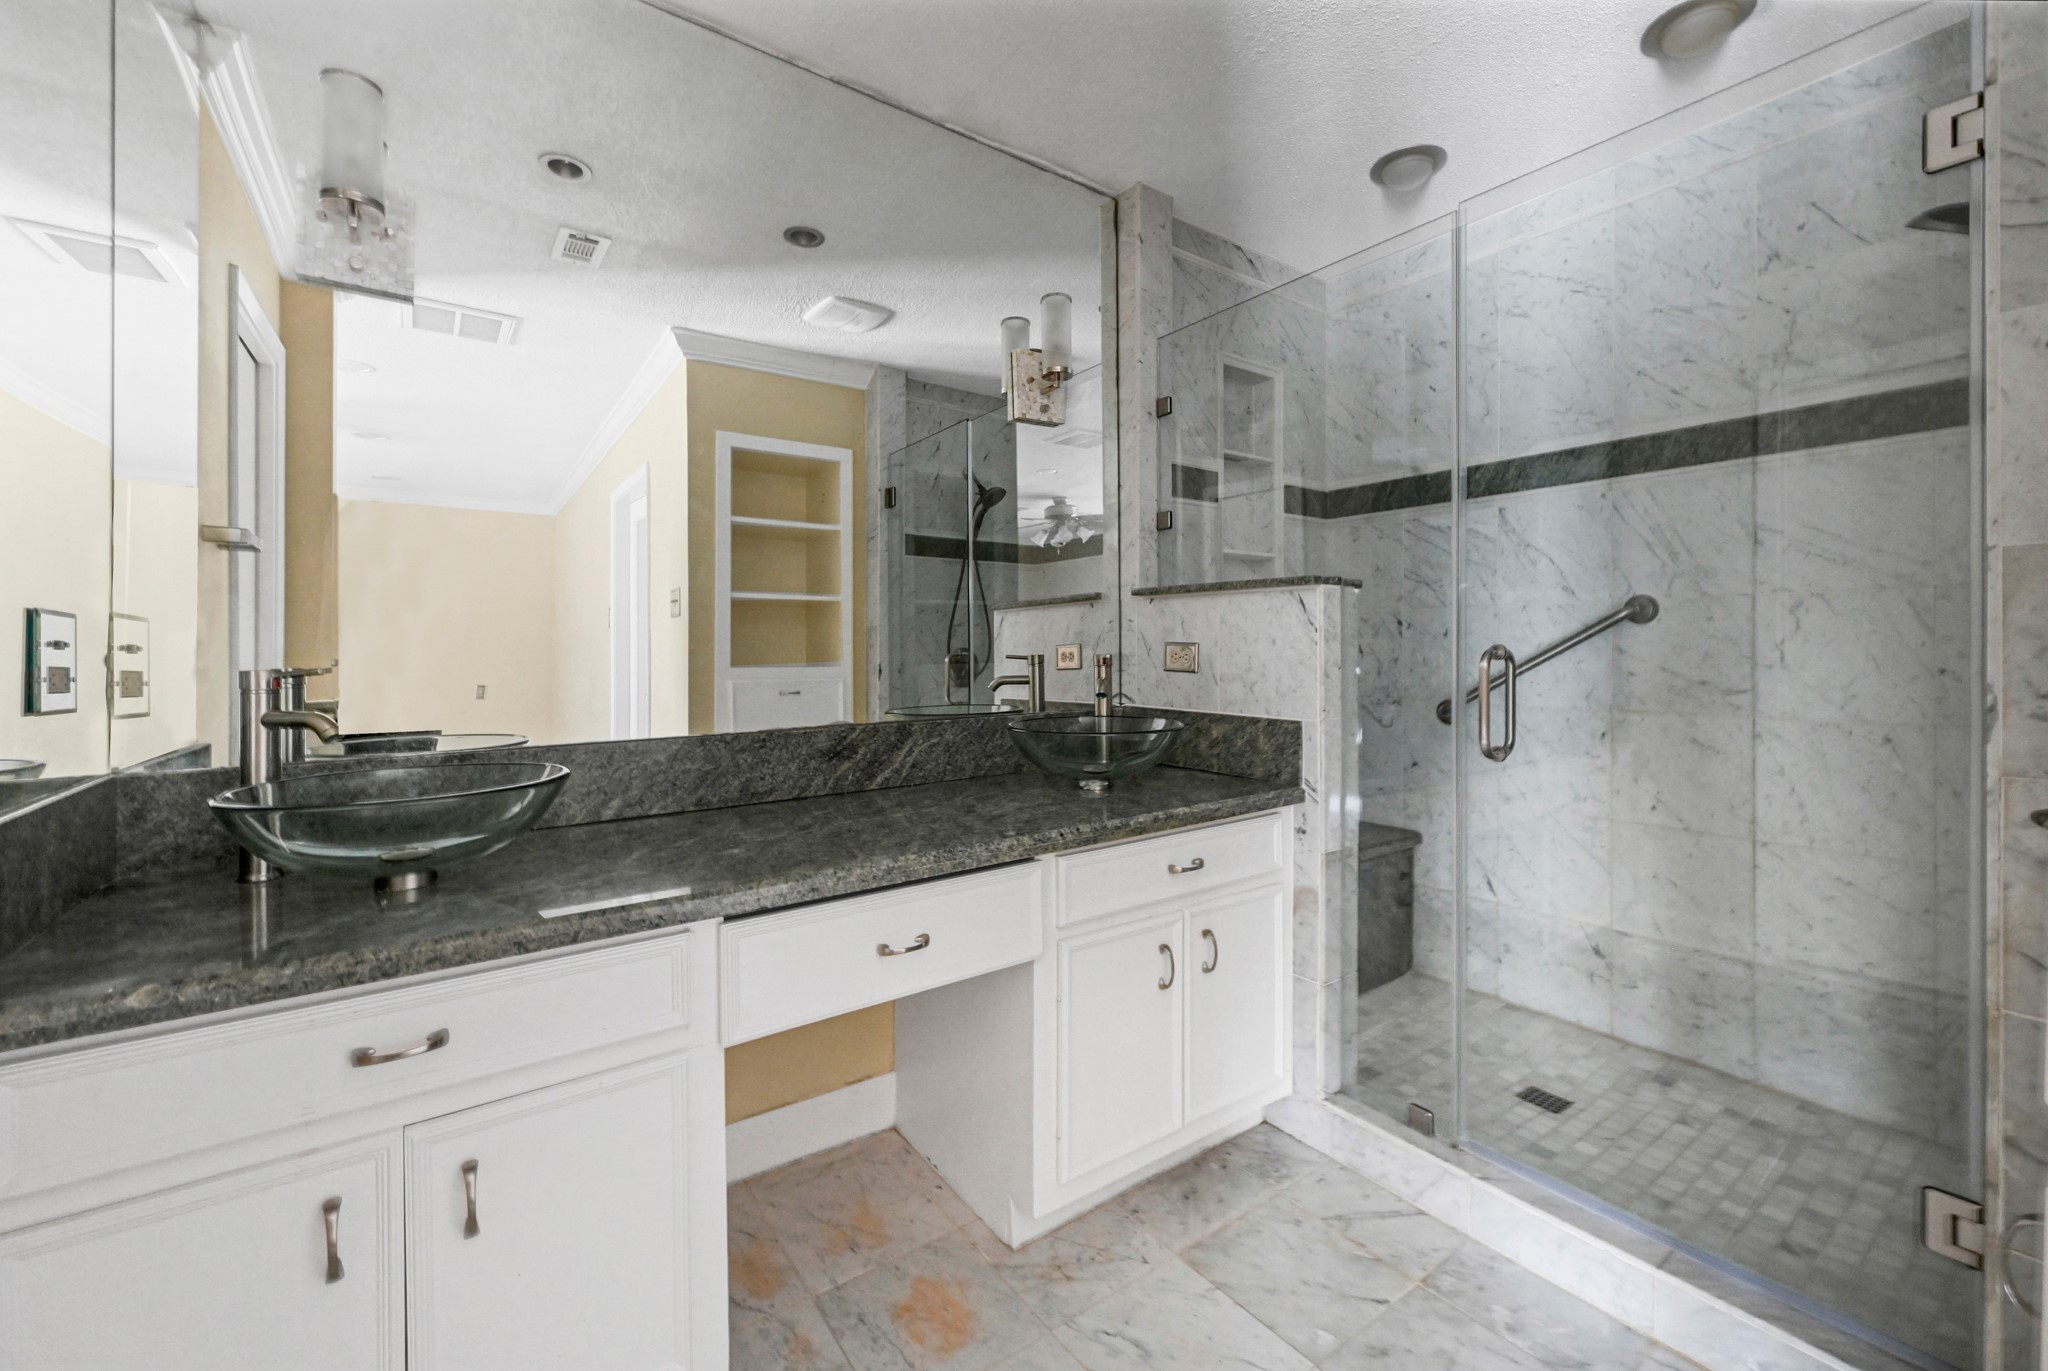 UPGRADED PRIMARY BATHROOM FEATURES DUAL VESSEL SINKS AND CUSTOM WALK-IN SHOWER!